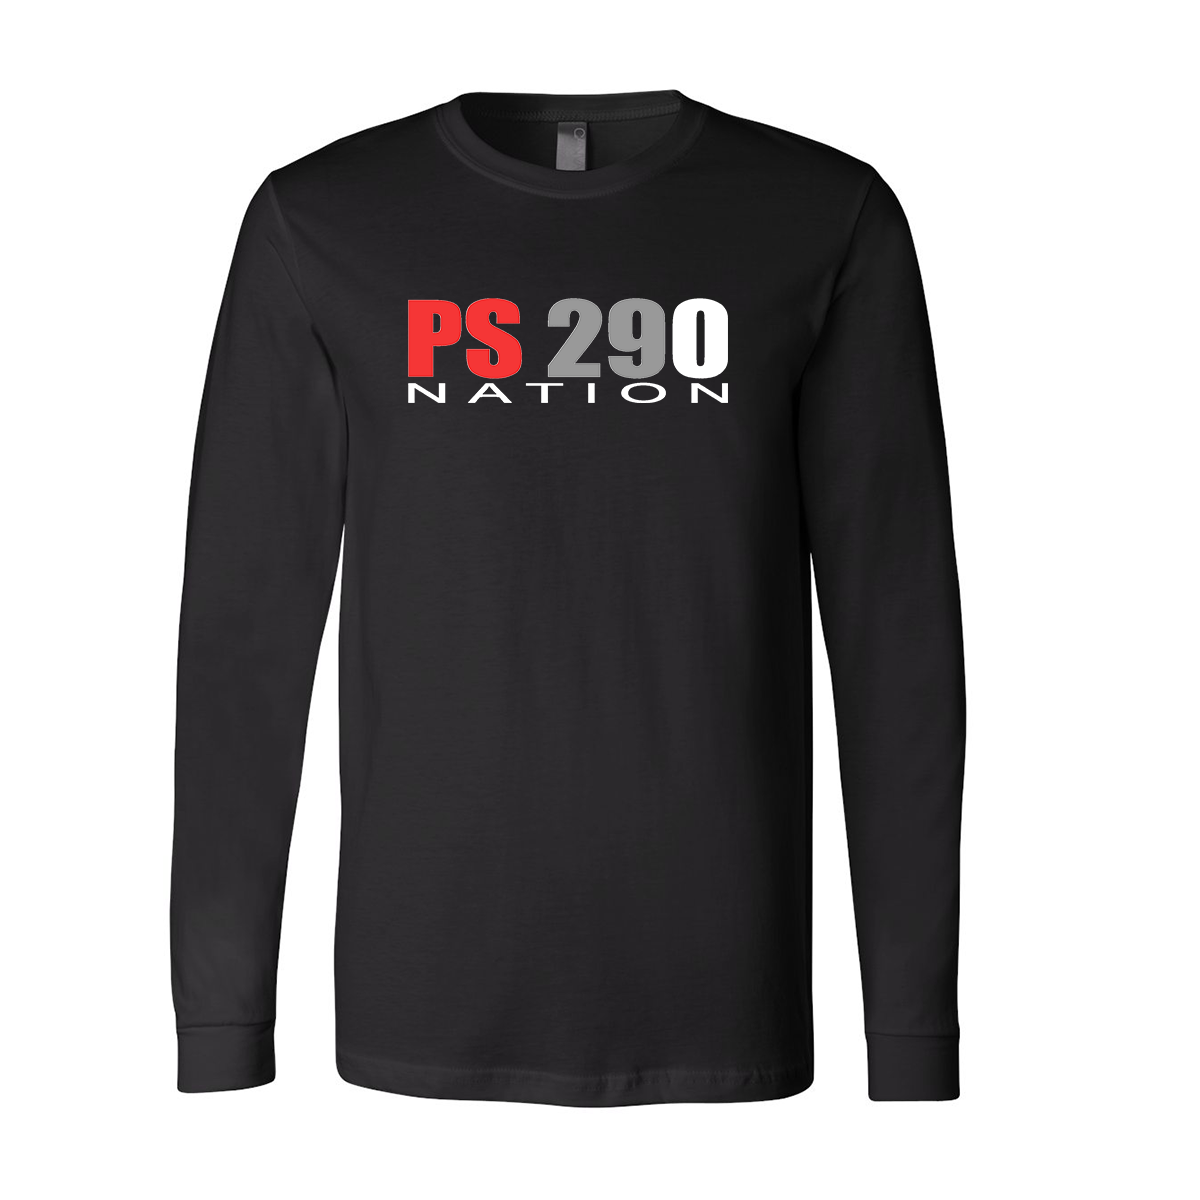 PS 290 Nation Long Sleeve